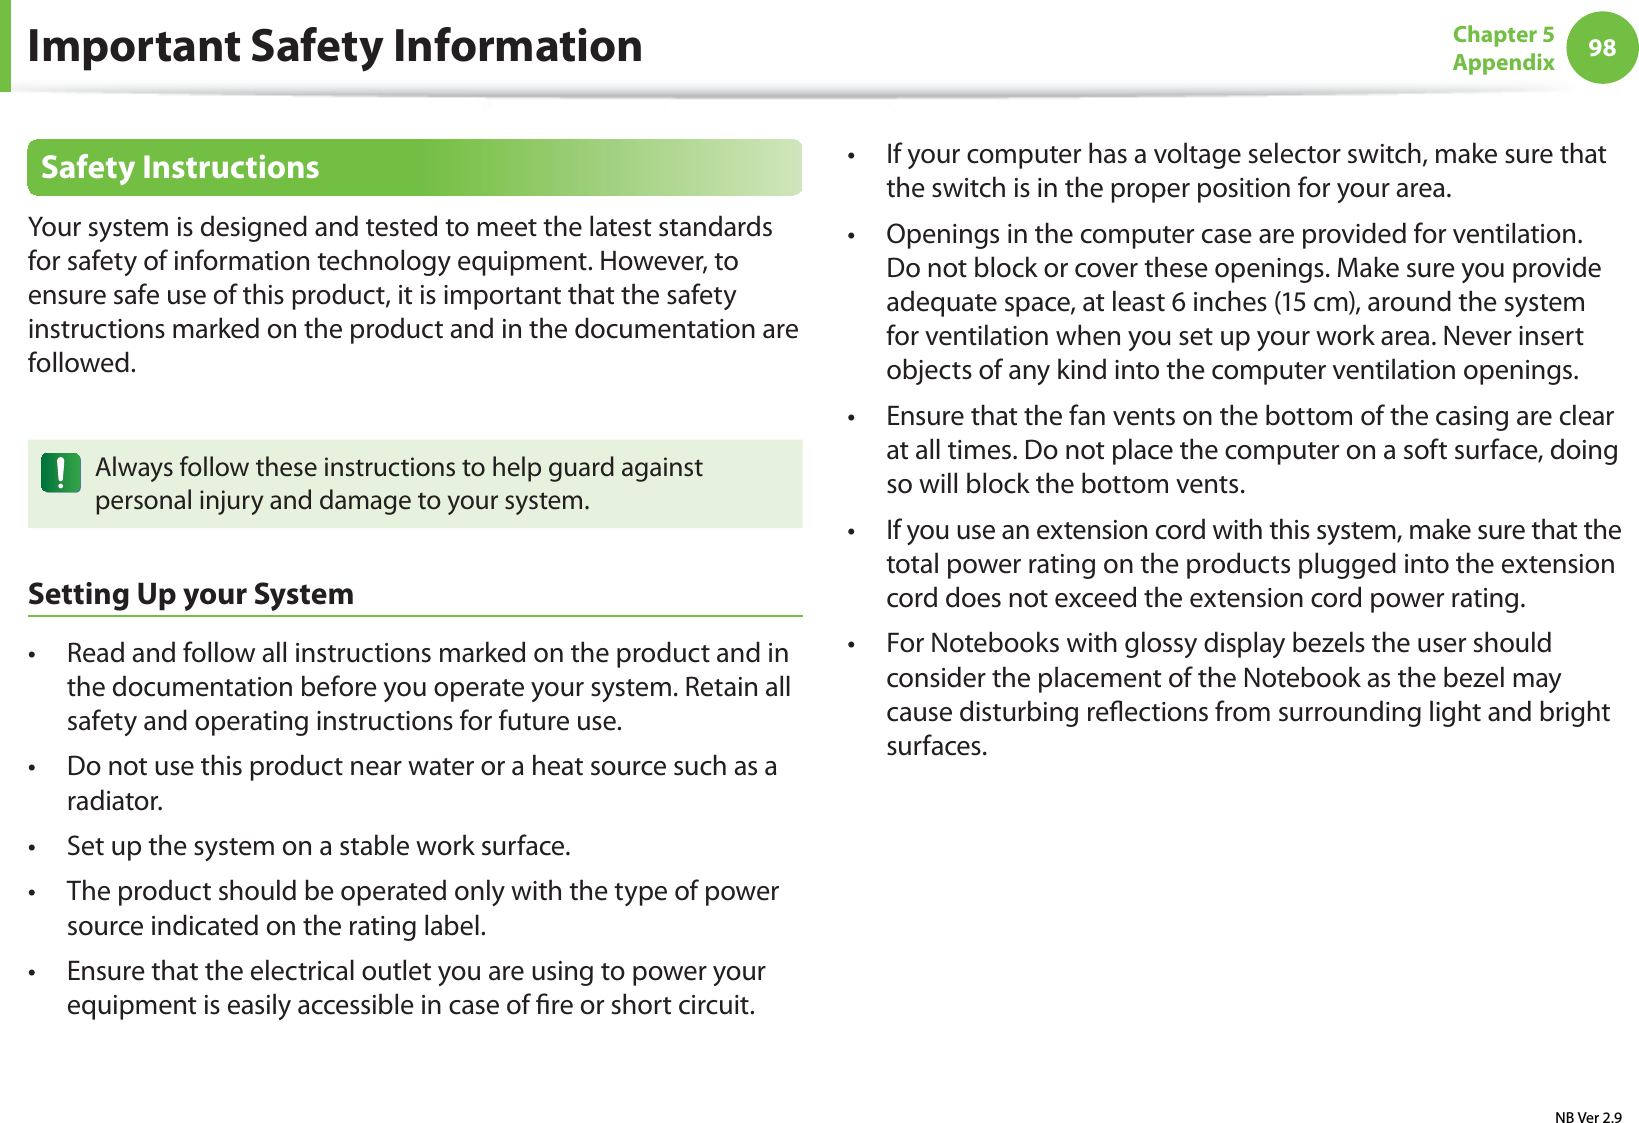 98Chapter 5 AppendixSafety InstructionsYour system is designed and tested to meet the latest standards for safety of information technology equipment. However, to ensure safe use of this product, it is important that the safety instructions marked on the product and in the documentation are followed.Always follow these instructions to help guard against personal injury and damage to your system.Setting Up your SystemRead and follow all instructions marked on the product and in t the documentation before you operate your system. Retain all safety and operating instructions for future use.Do not use this product near water or a heat source such as a t radiator.Set up the system on a stable work surface.t The product should be operated only with the type of power t source indicated on the rating label.Ensure that the electrical outlet you are using to power your t equipment is easily accessible in case of re or short circuit.If your computer has a voltage selector switch, make sure that t the switch is in the proper position for your area.Openings in the computer case are provided for ventilation. t Do not block or cover these openings. Make sure you provide adequate space, at least 6 inches (15 cm), around the system for ventilation when you set up your work area. Never insert objects of any kind into the computer ventilation openings.Ensure that the fan vents on the bottom of the casing are clear t at all times. Do not place the computer on a soft surface, doing so will block the bottom vents.If you use an extension cord with this system, make sure that the t total power rating on the products plugged into the extension cord does not exceed the extension cord power rating.For Notebooks with glossy display bezels the user should t consider the placement of the Notebook as the bezel may cause disturbing reections from surrounding light and bright surfaces.Important Safety InformationNB Ver 2.9